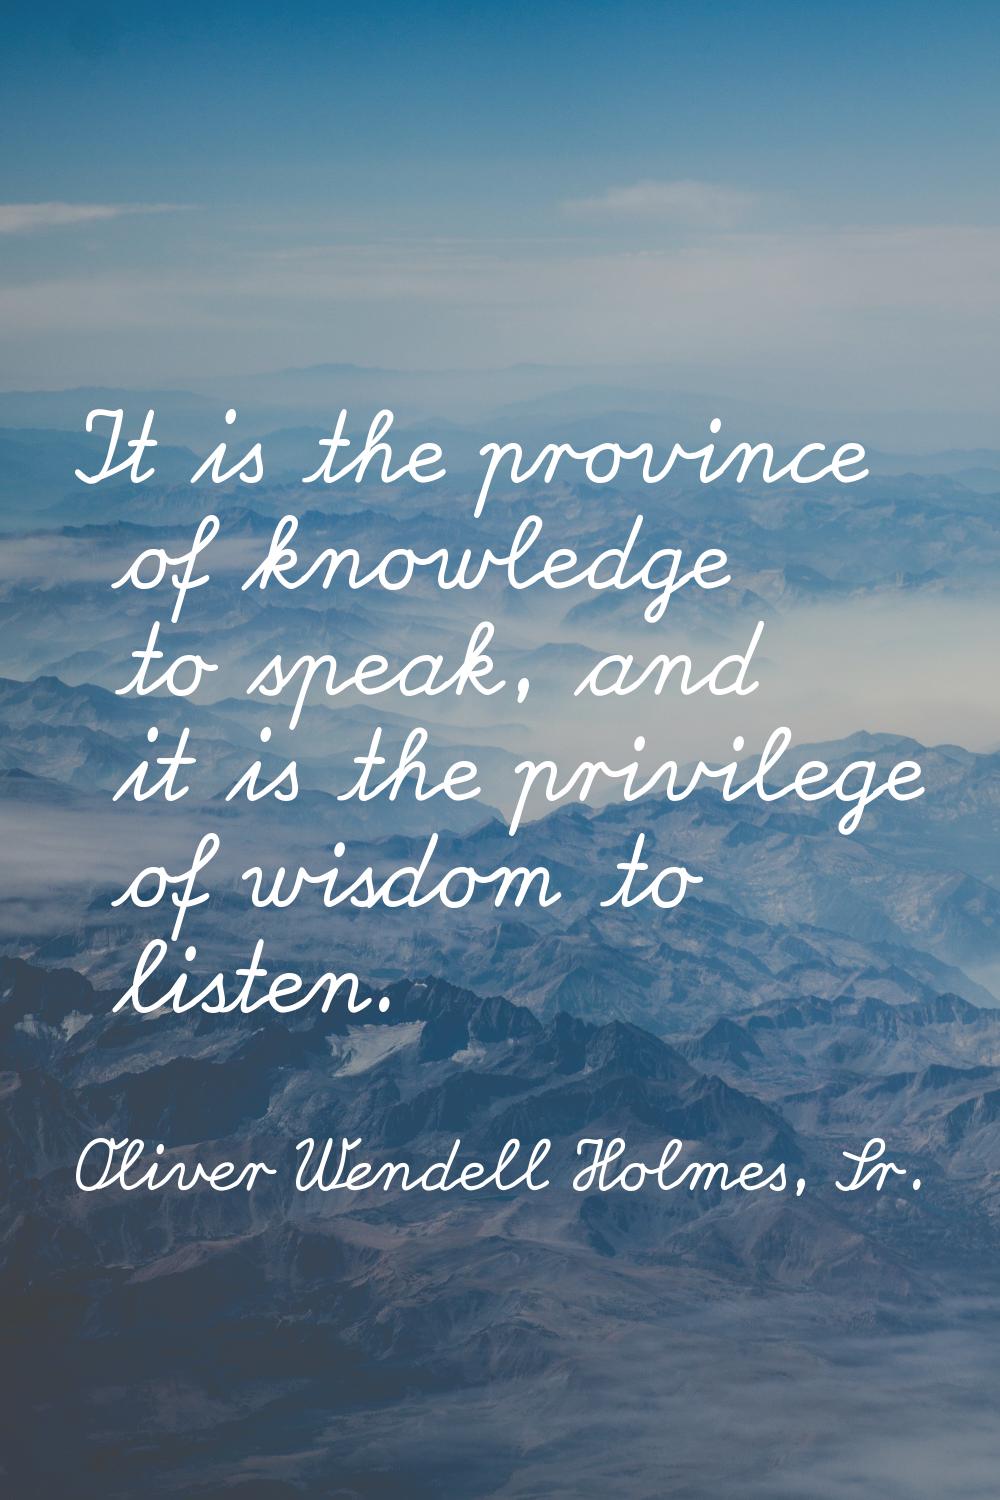 It is the province of knowledge to speak, and it is the privilege of wisdom to listen.